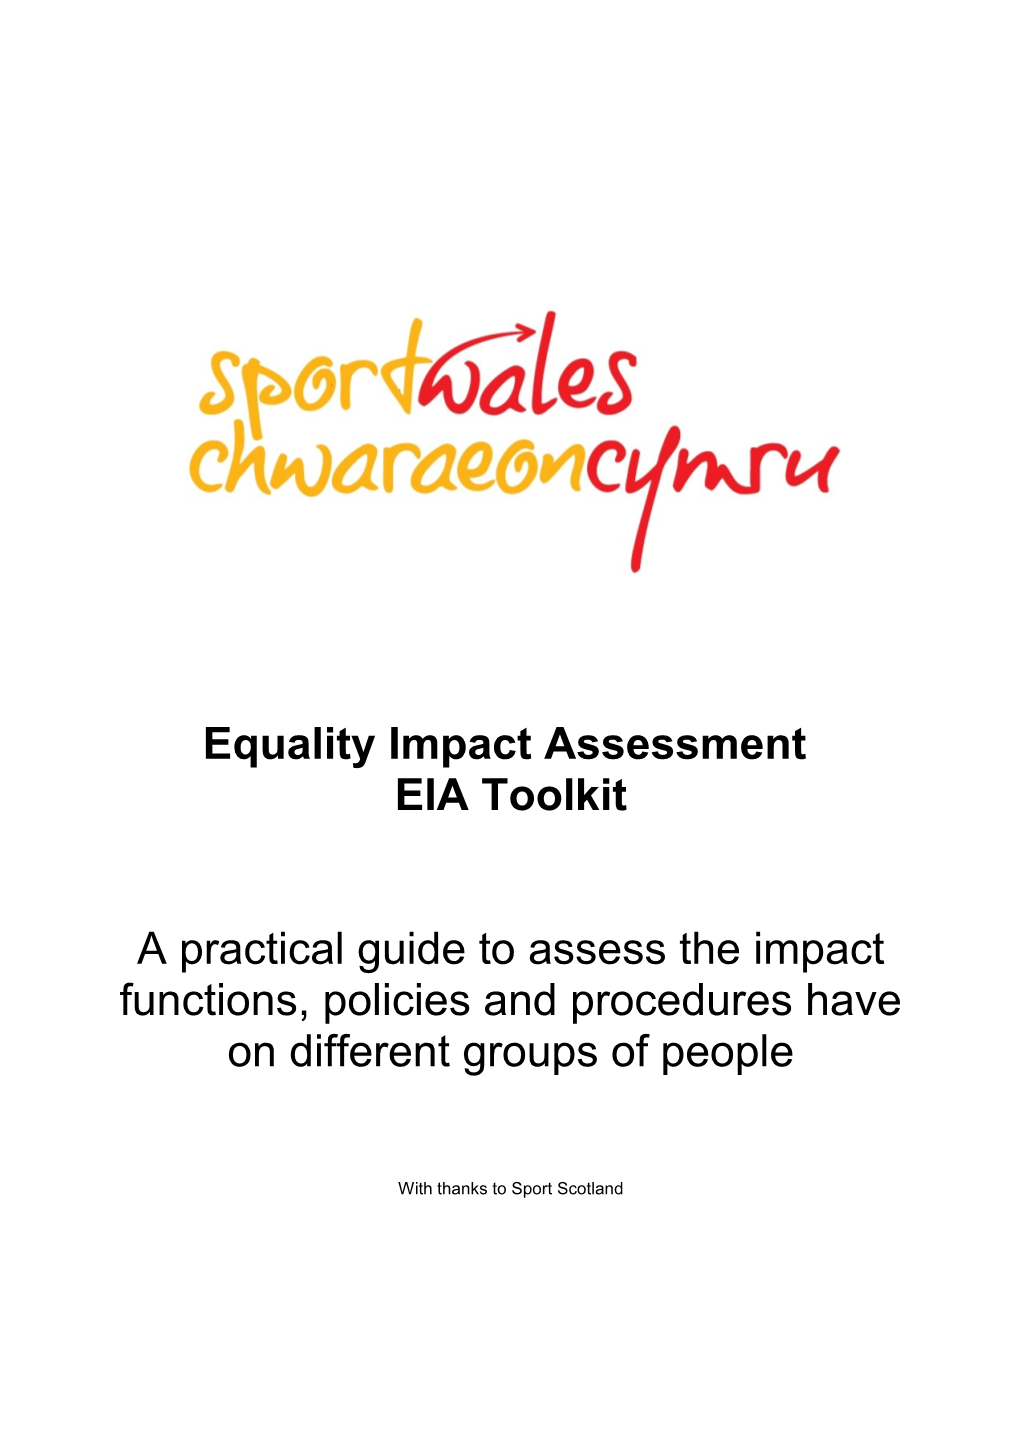 Equality Impact Asessment Toolkit